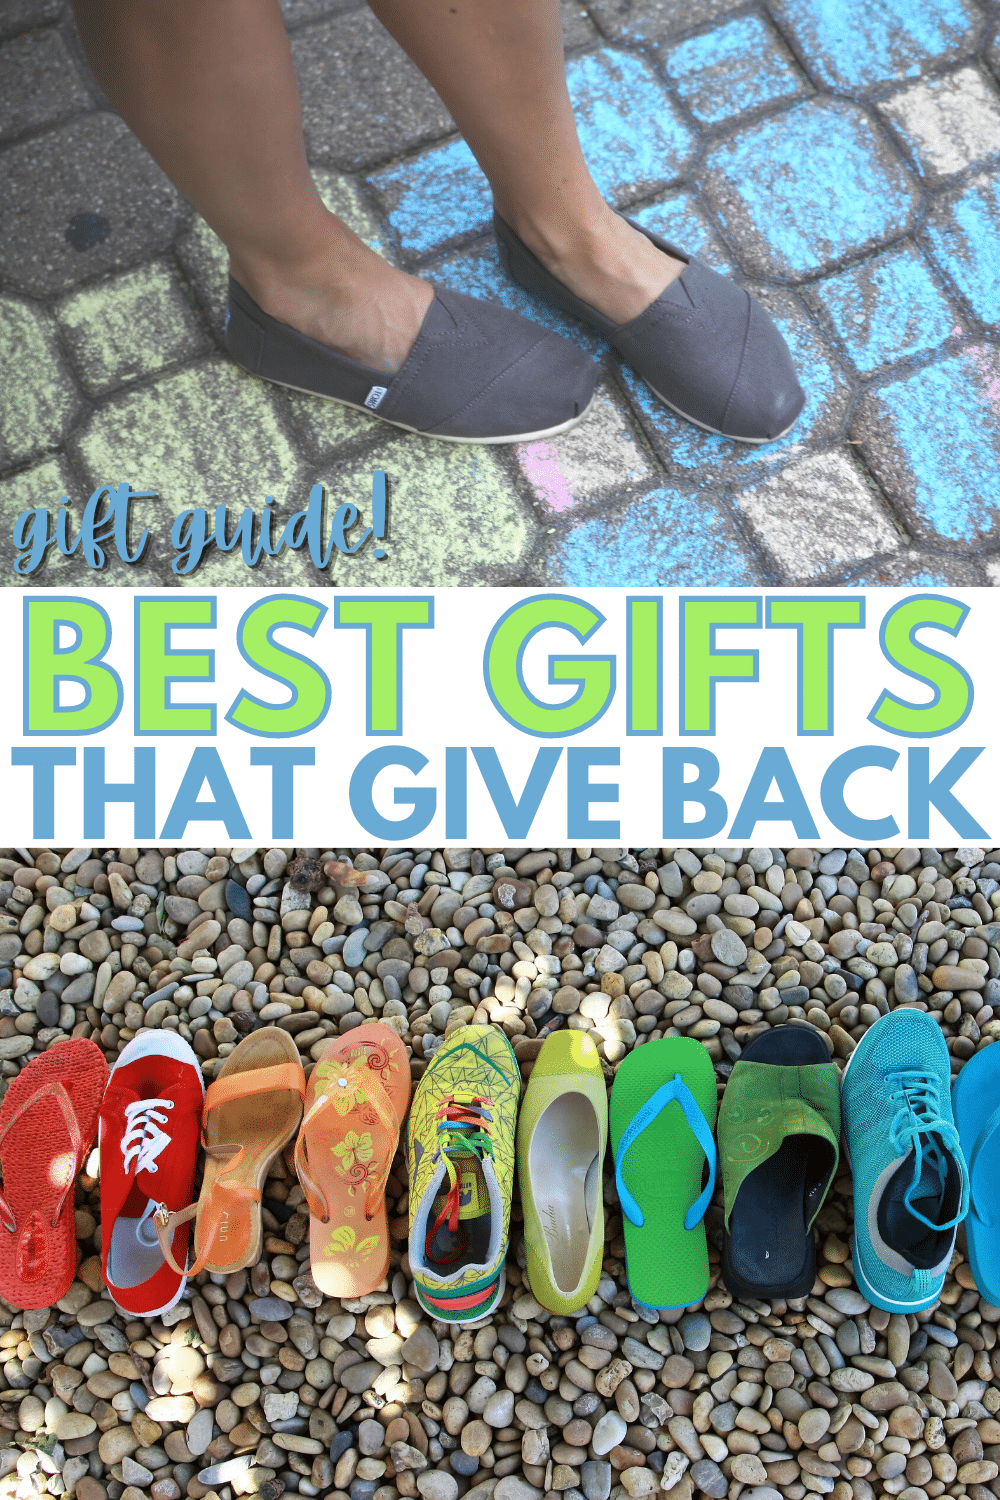 If you want to choose gifts to brighten the lives of the people you care about, here's a collection of some of the best gifts that give back to society. #giftguide #giftideas #giveback via @wondermomwannab